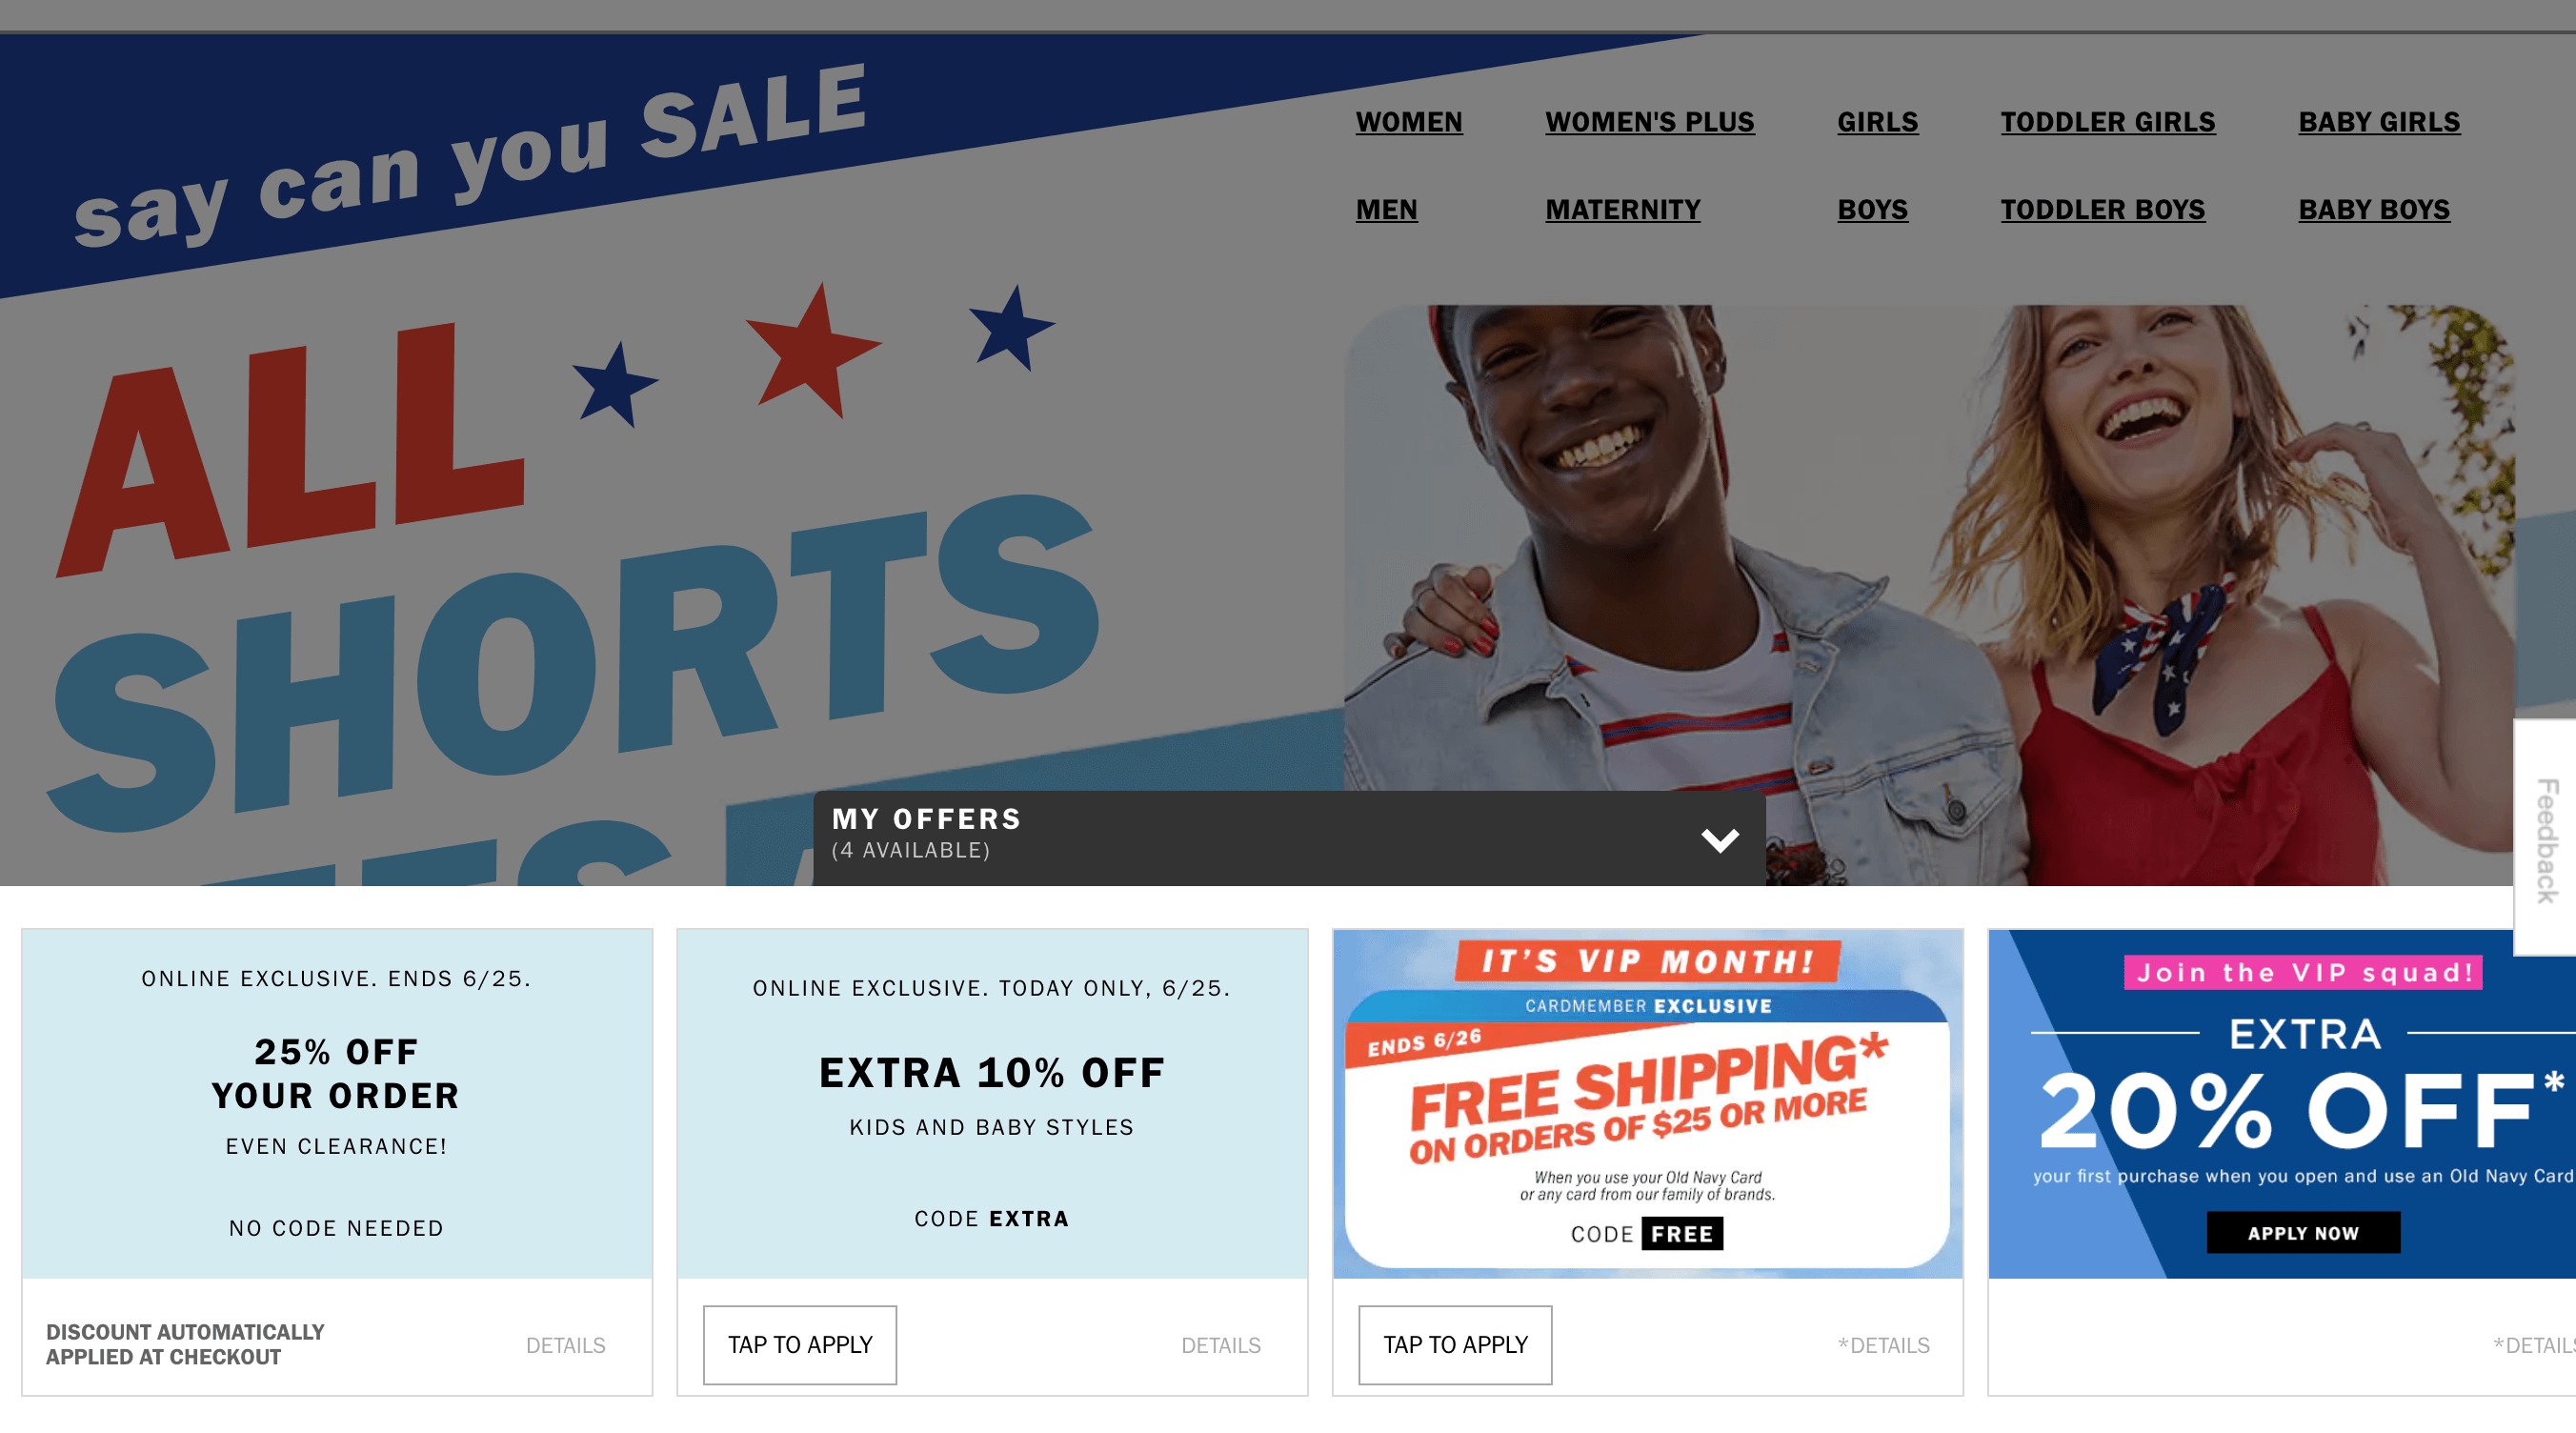 4 Tips for Perfecting Promo Code UX on Websites